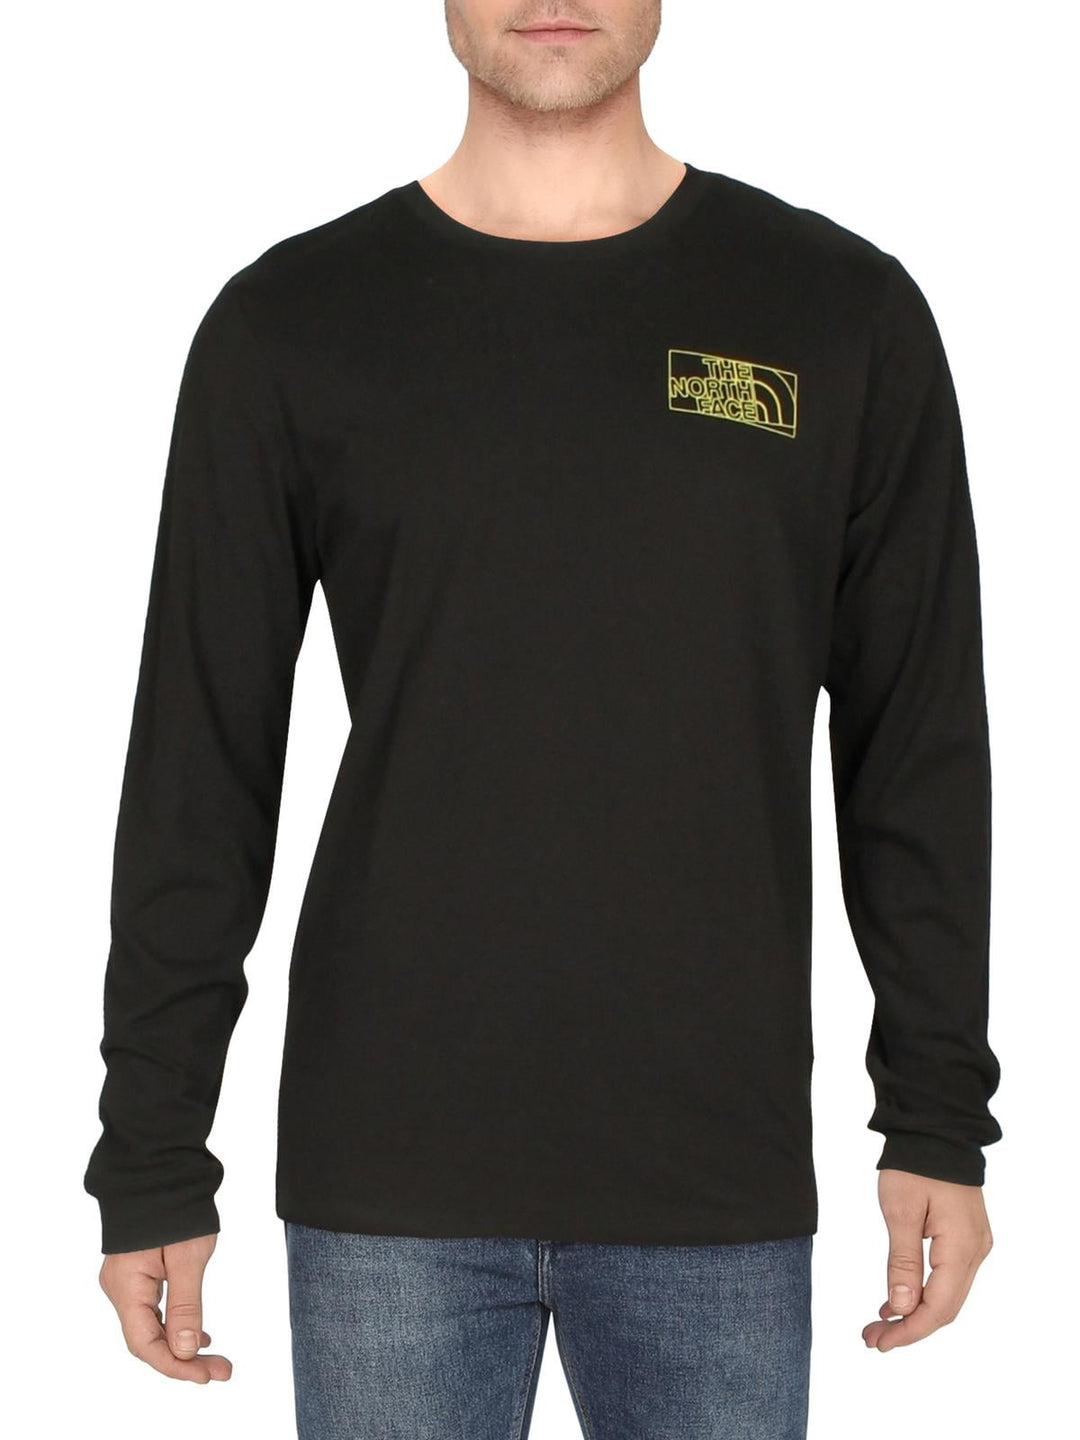 The North Face Men's Long Sleeve Cotton Graphic Tee Black Size Small